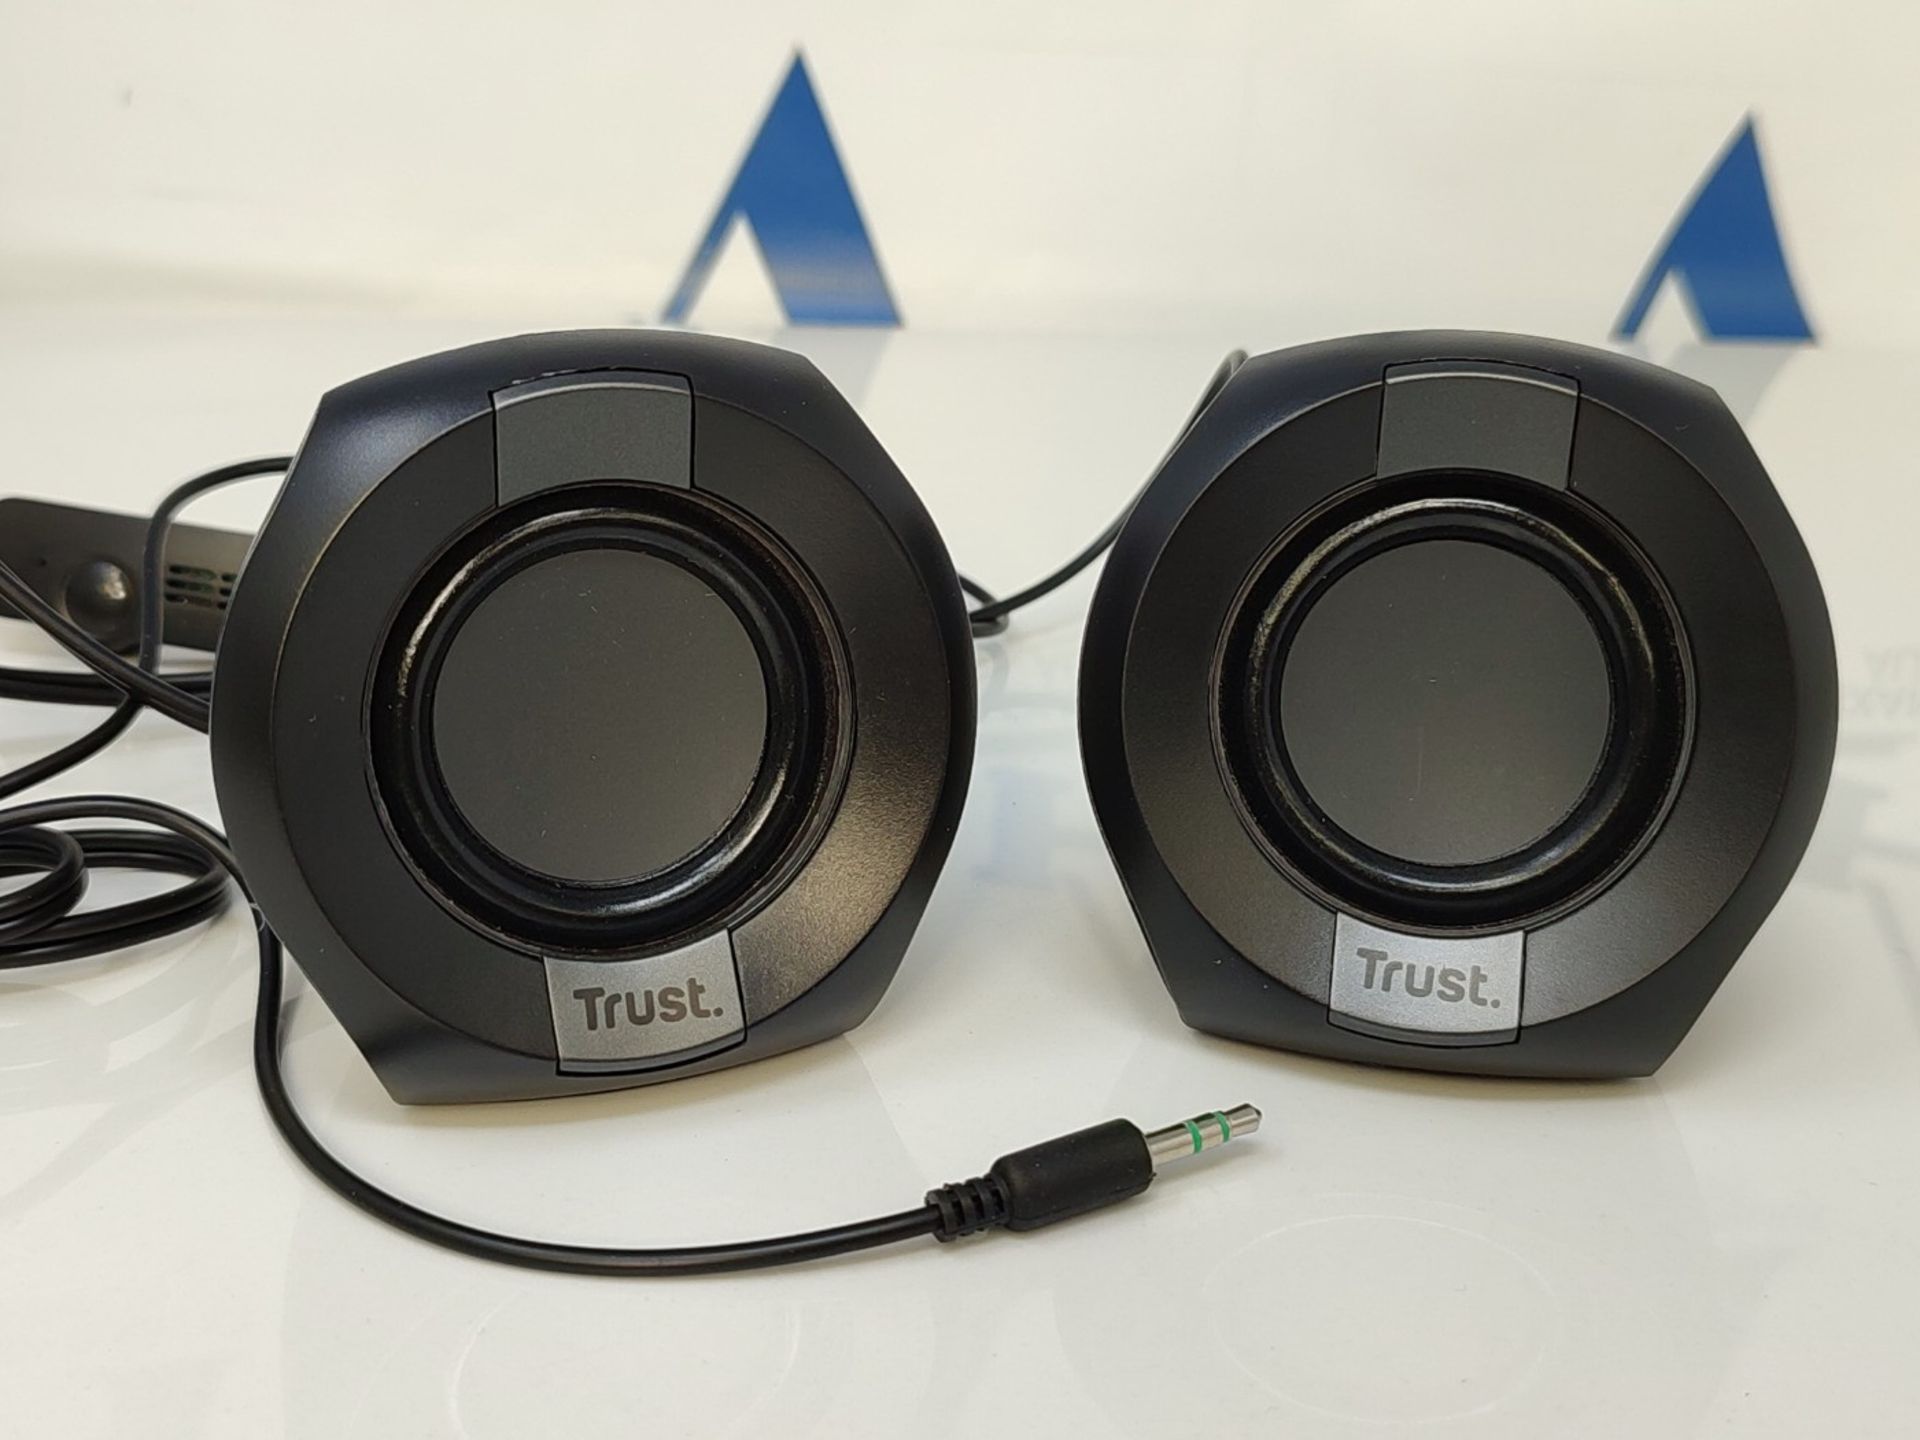 Trust Polo Small PC Speakers 2.0, 8W (4W RMS), Compact speaker set, USB powered speake - Image 3 of 6